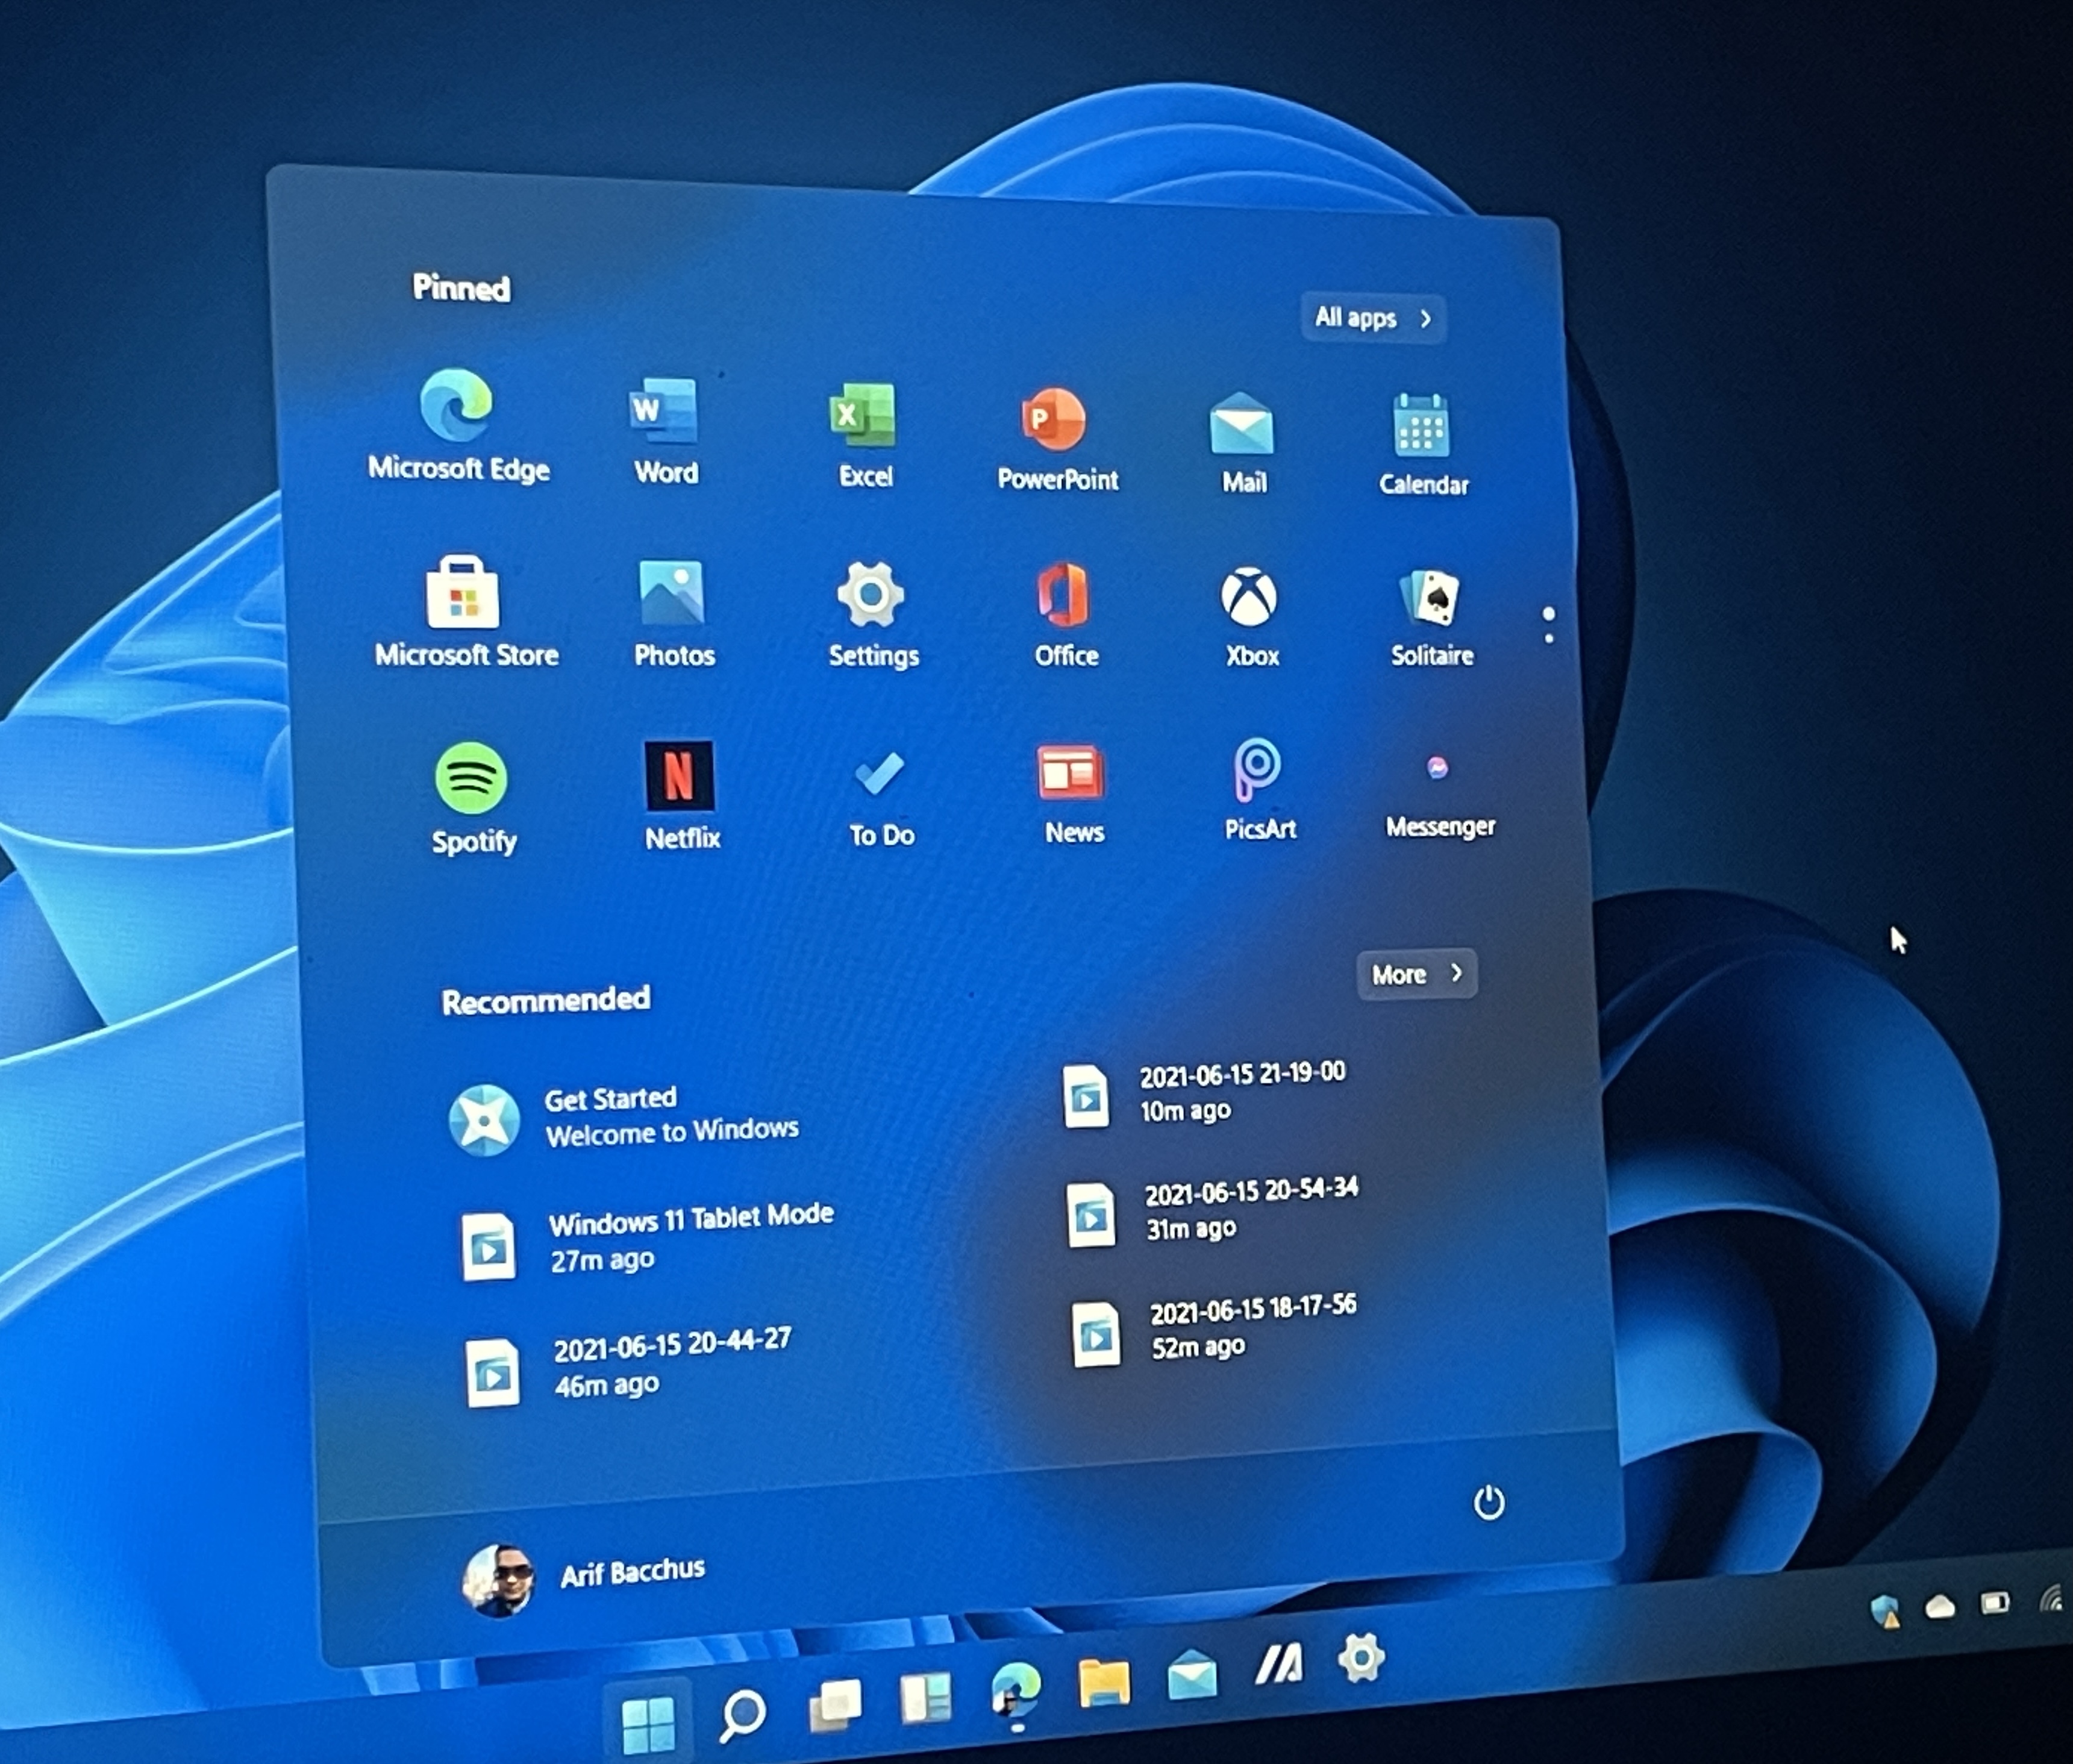 11 New Windows 11 Features We Are Most Excited For